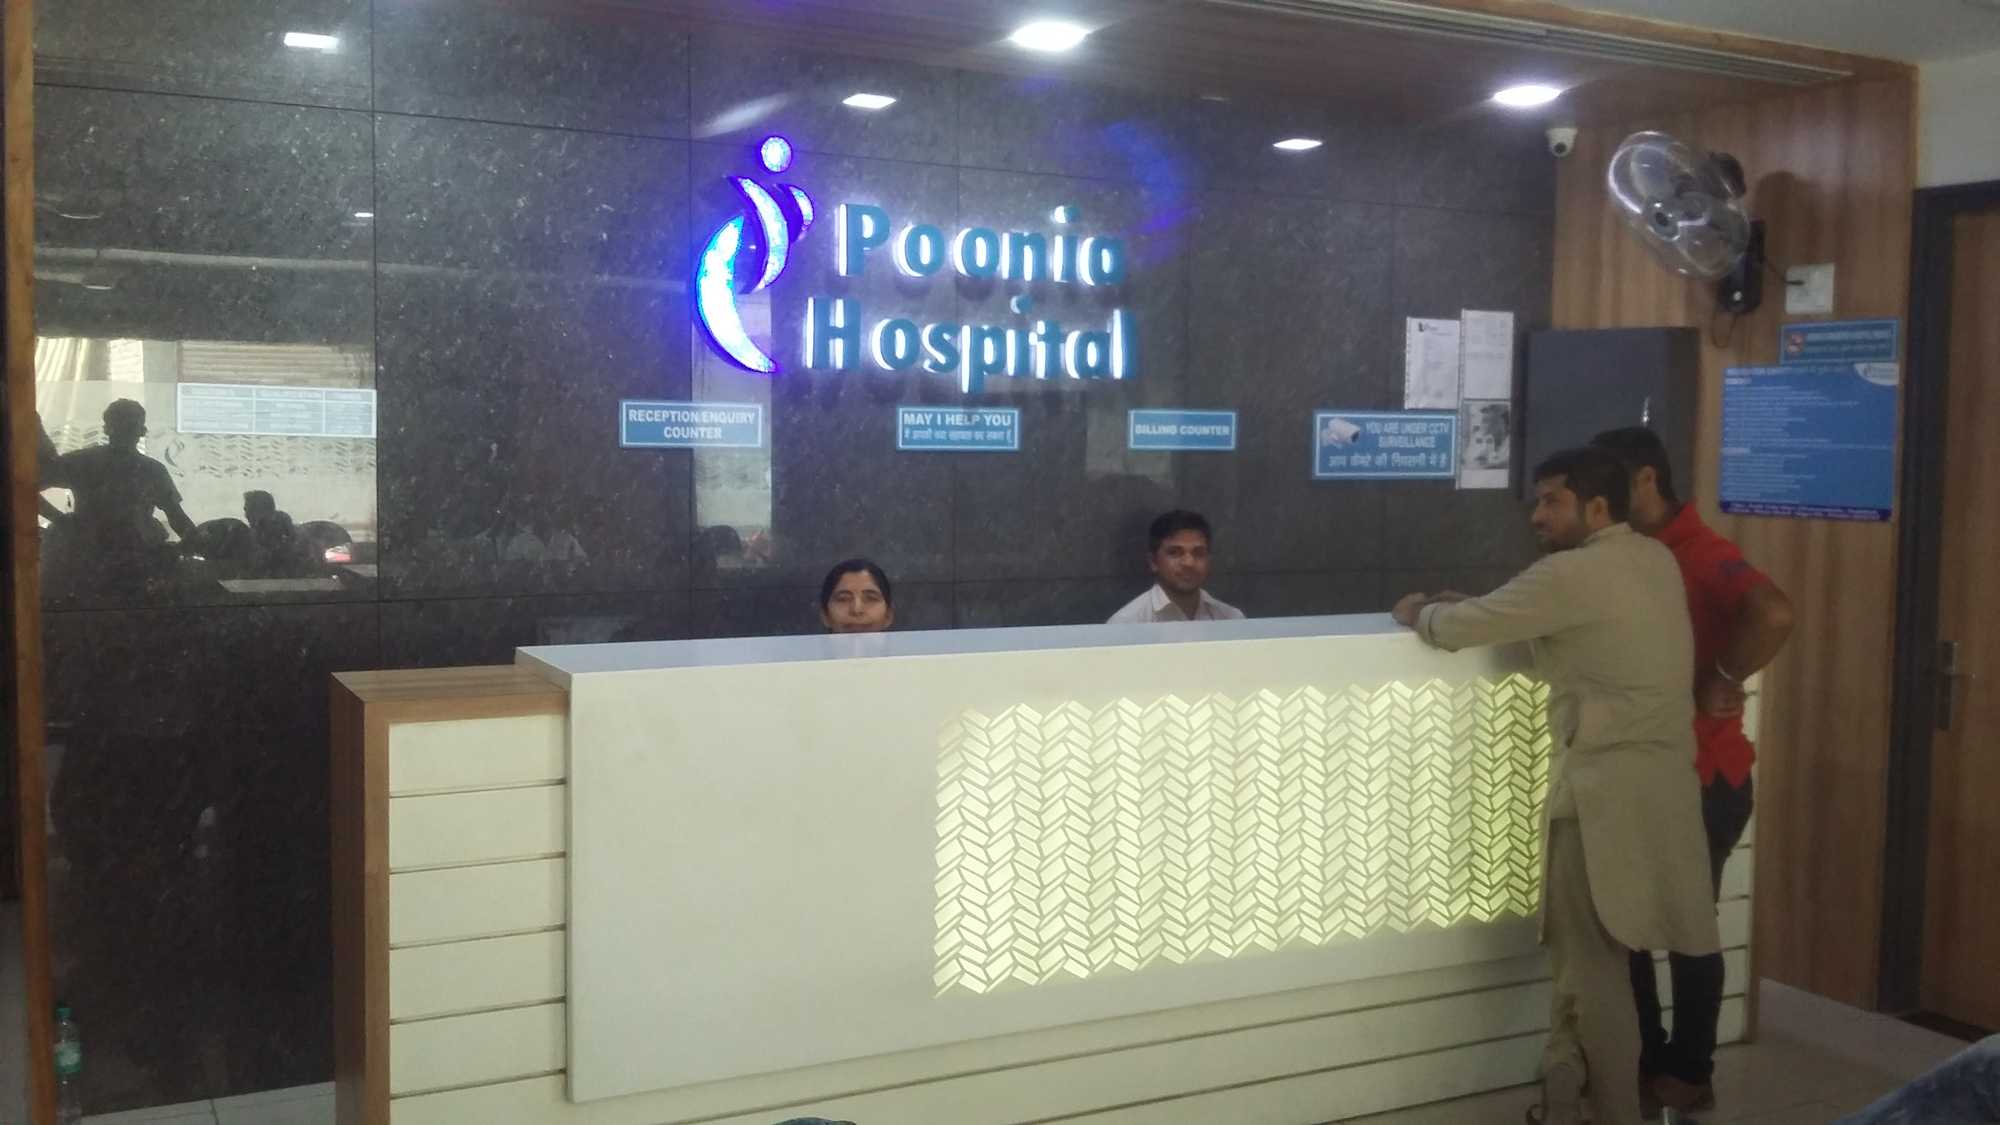 Poonia Hospital|Dentists|Medical Services